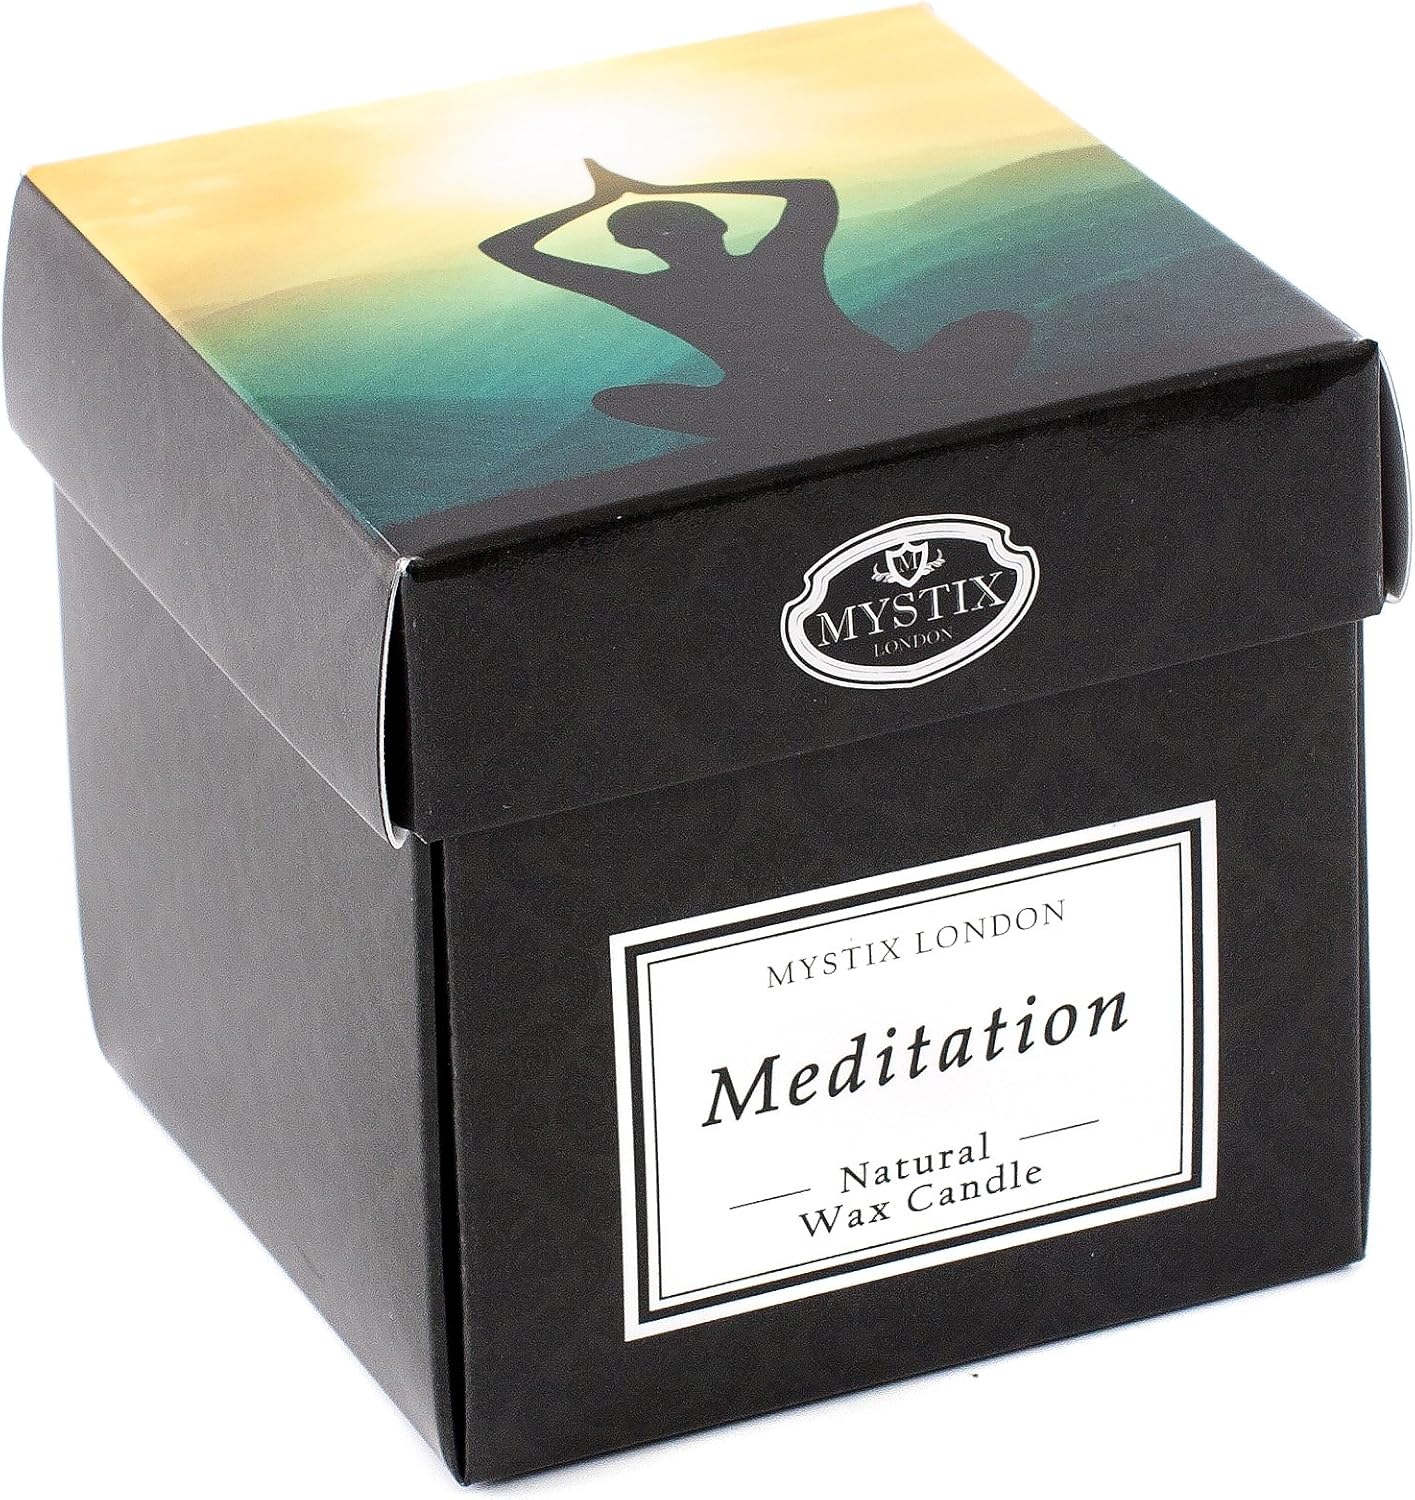 Mystix London | Meditation - Scented Candle Large 29cl | Best Aroma for Home, Kitchen, Living Room and Bathroom | Perfect as a Gift | Reusable Glass Jar